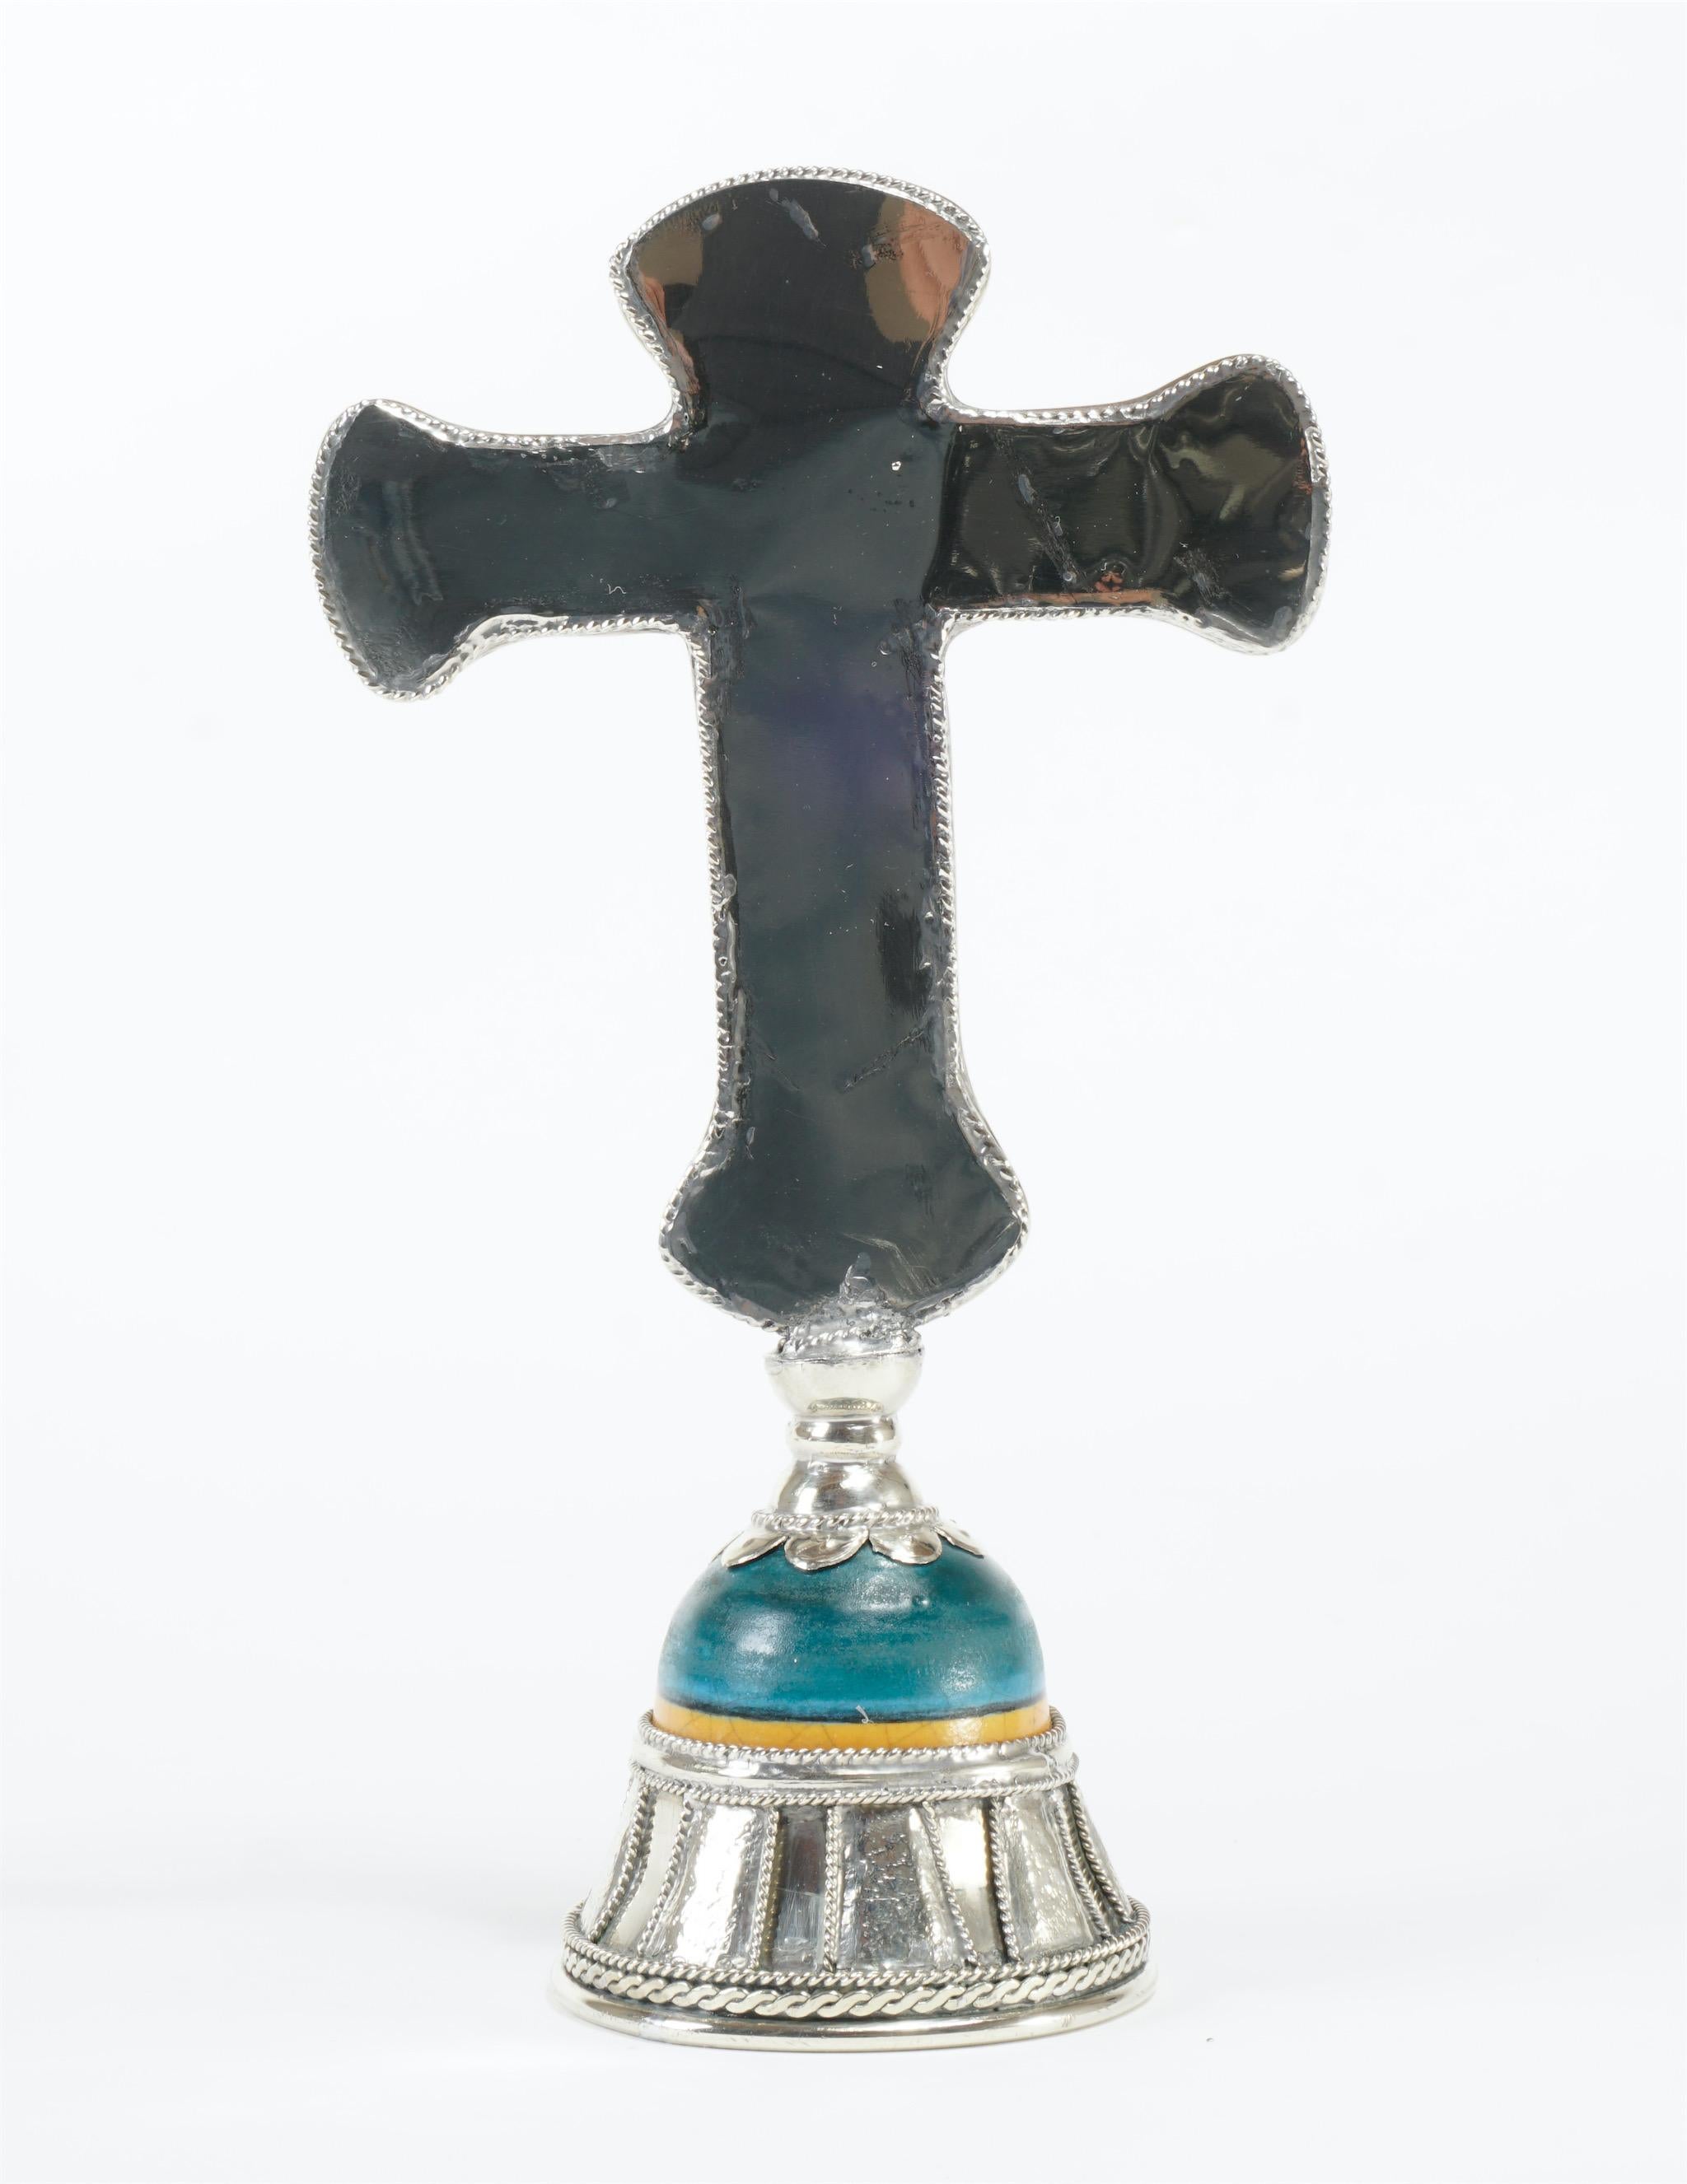 Other Ceramic and White Metal 'Alpaca' Crucifix with Cerámic Corpus of Christ